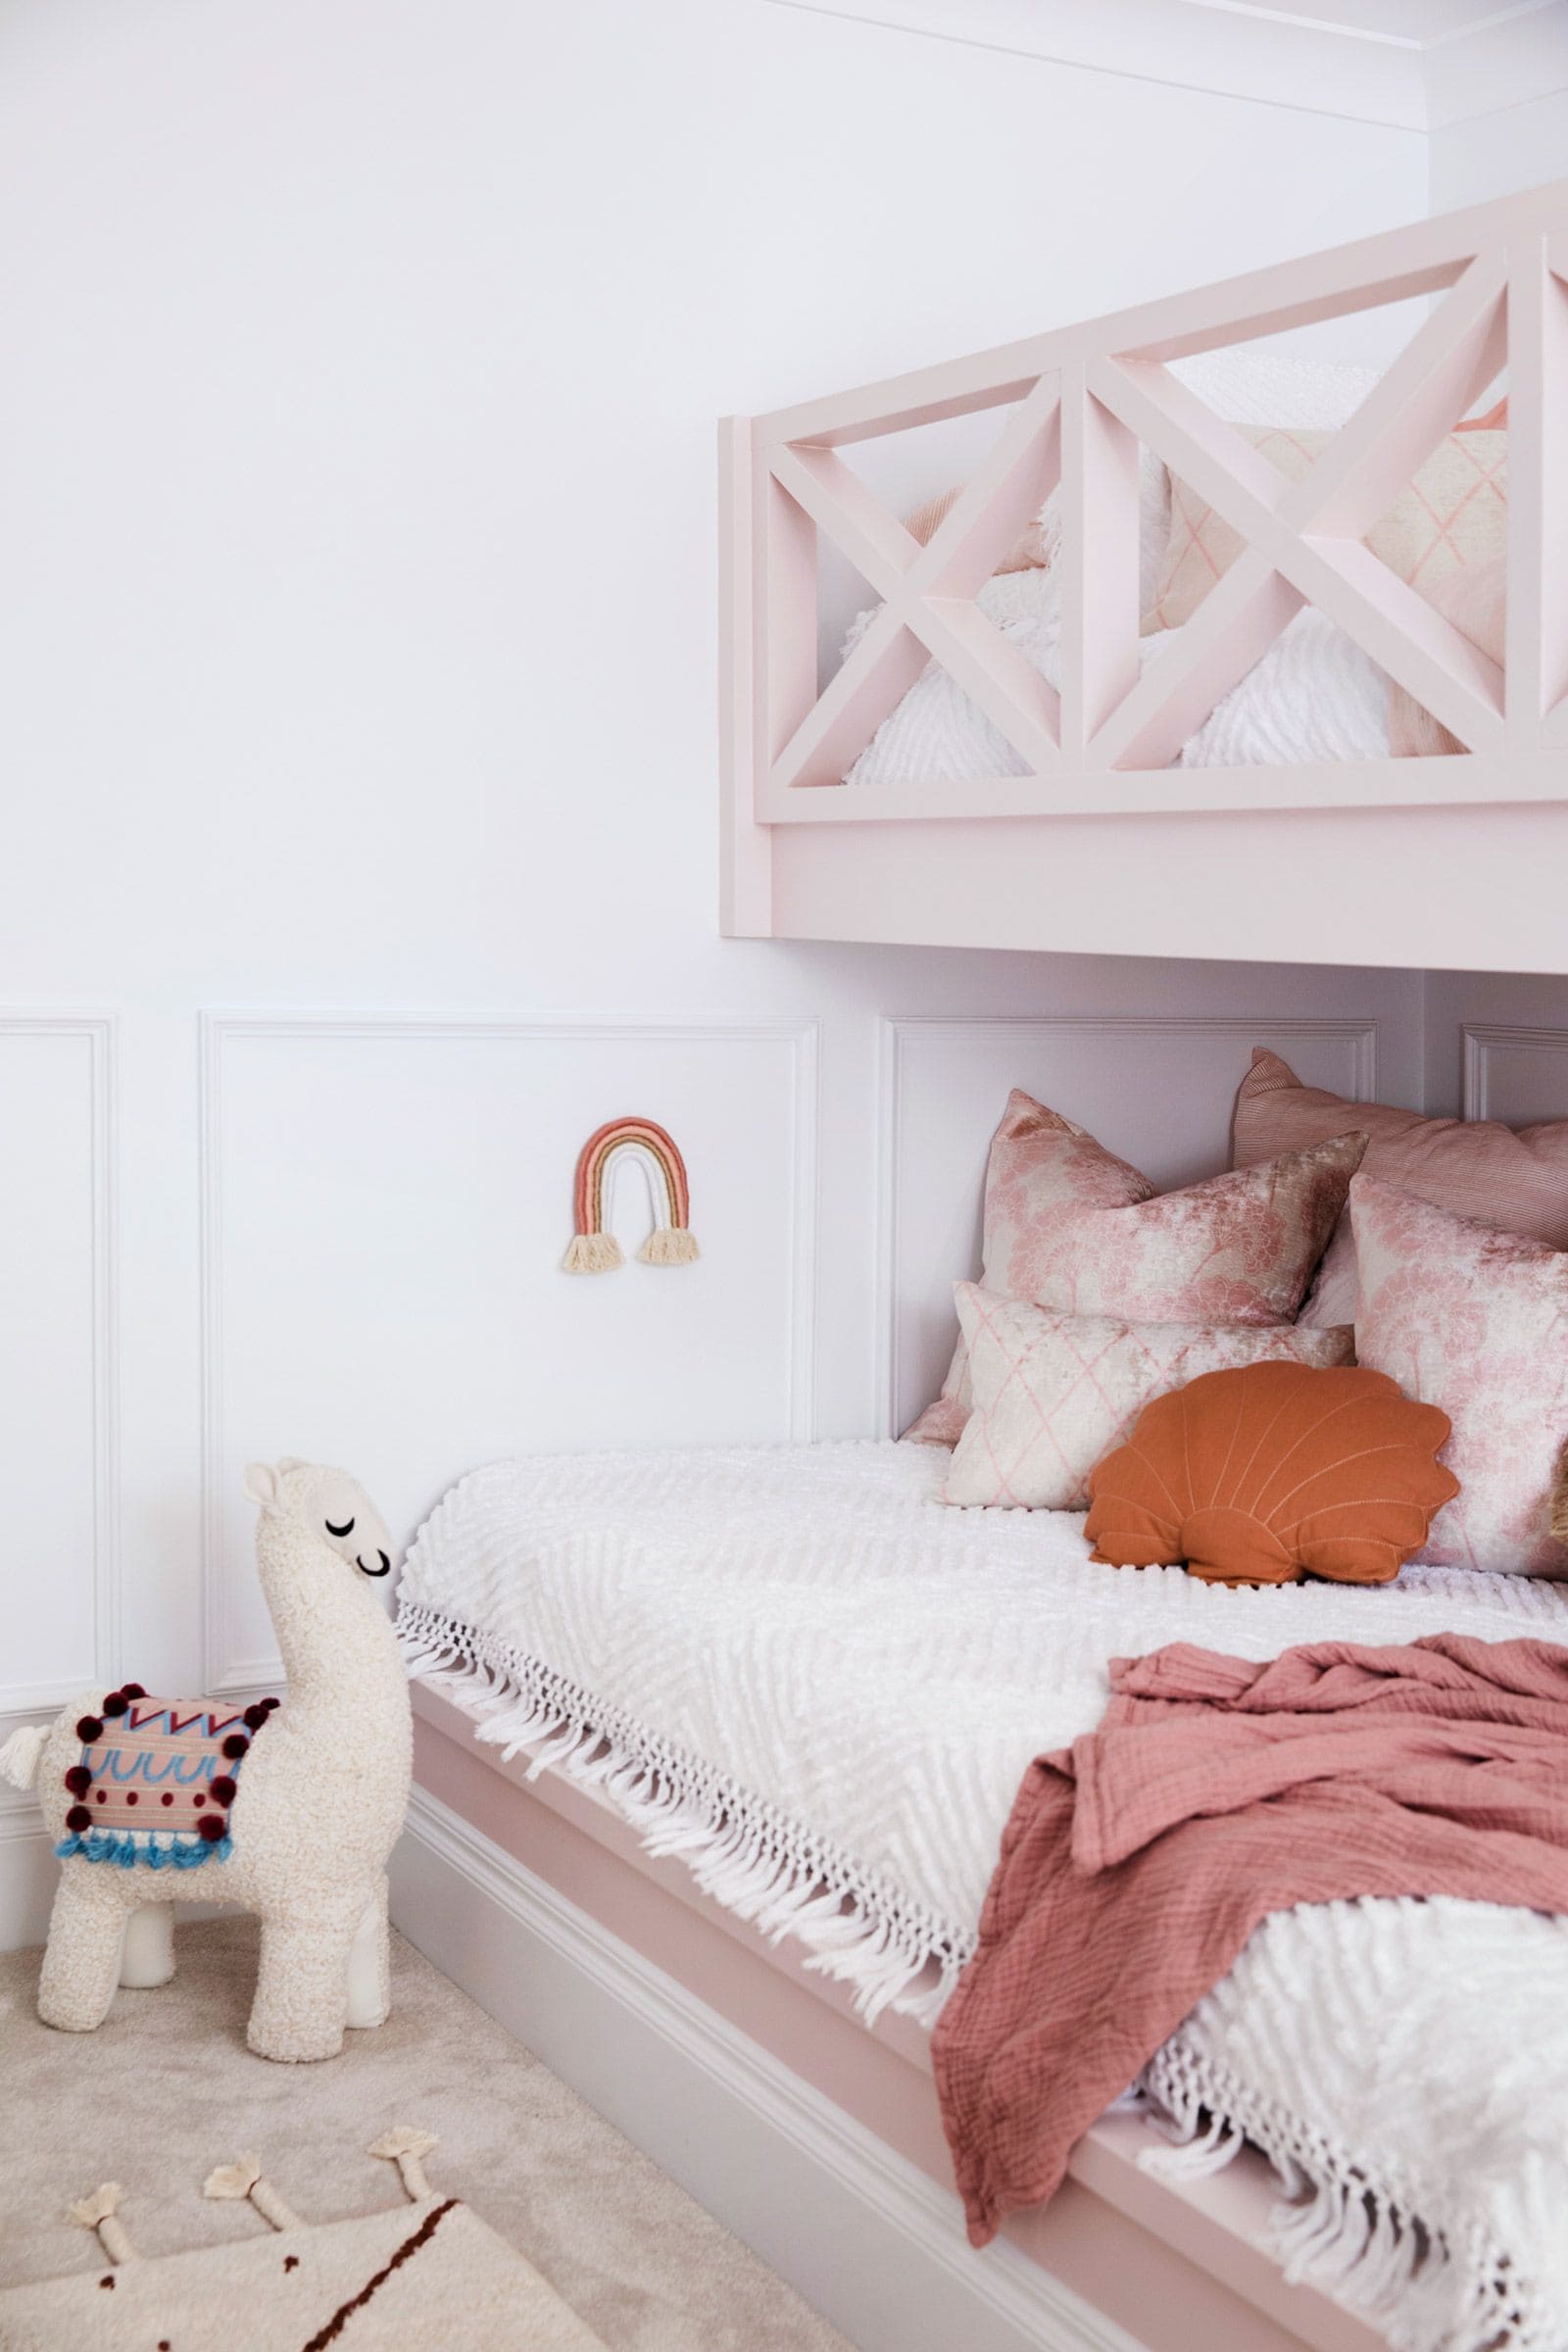 25 fantastic built-in bed ideas for children's rooms - 75